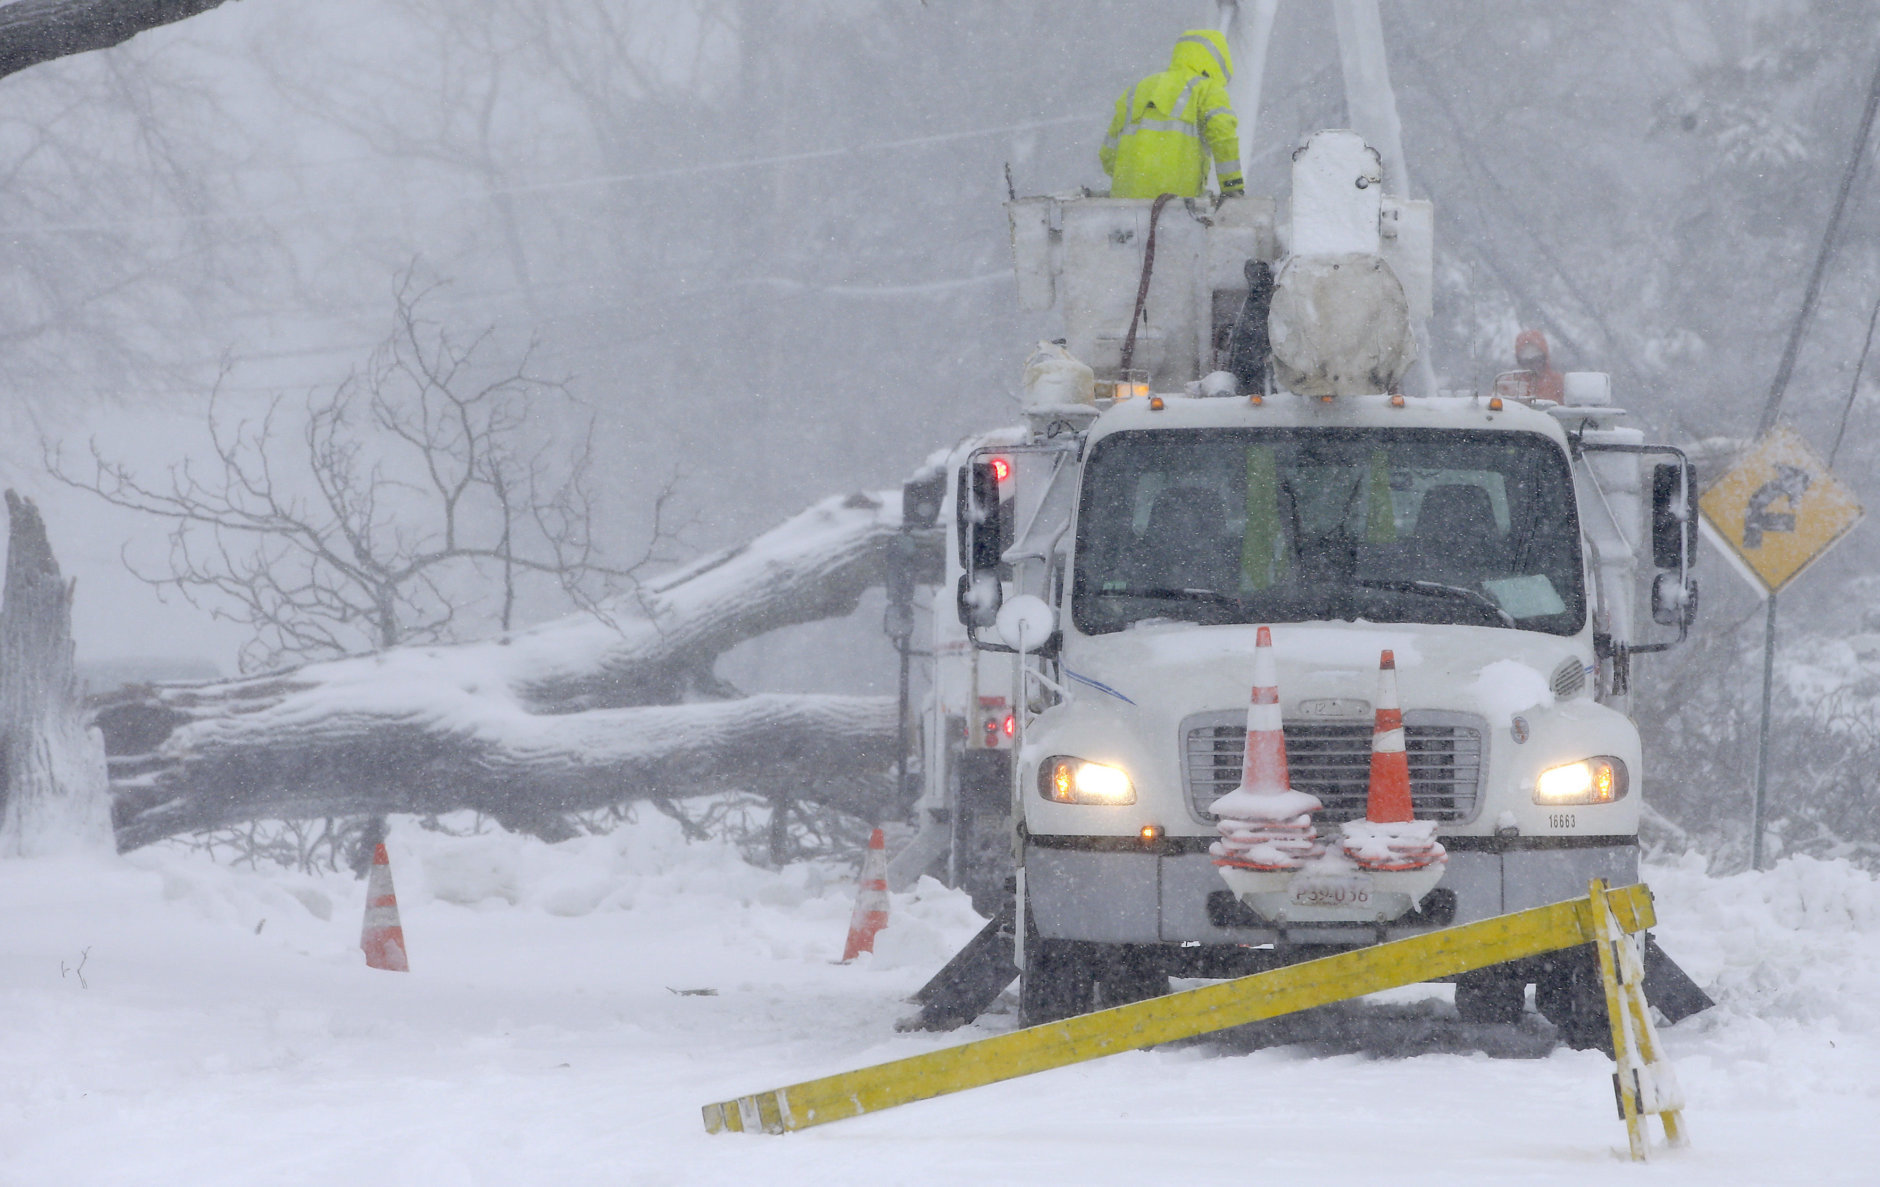 Workers remove a fallen tree from a road and repair power lines during a winter storm, Tuesday, March 13, 2018, in Norwell, Mass. The nor'easter is expected to deliver up to 2 feet of snow to some areas of New England. (AP Photo/Steven Senne)